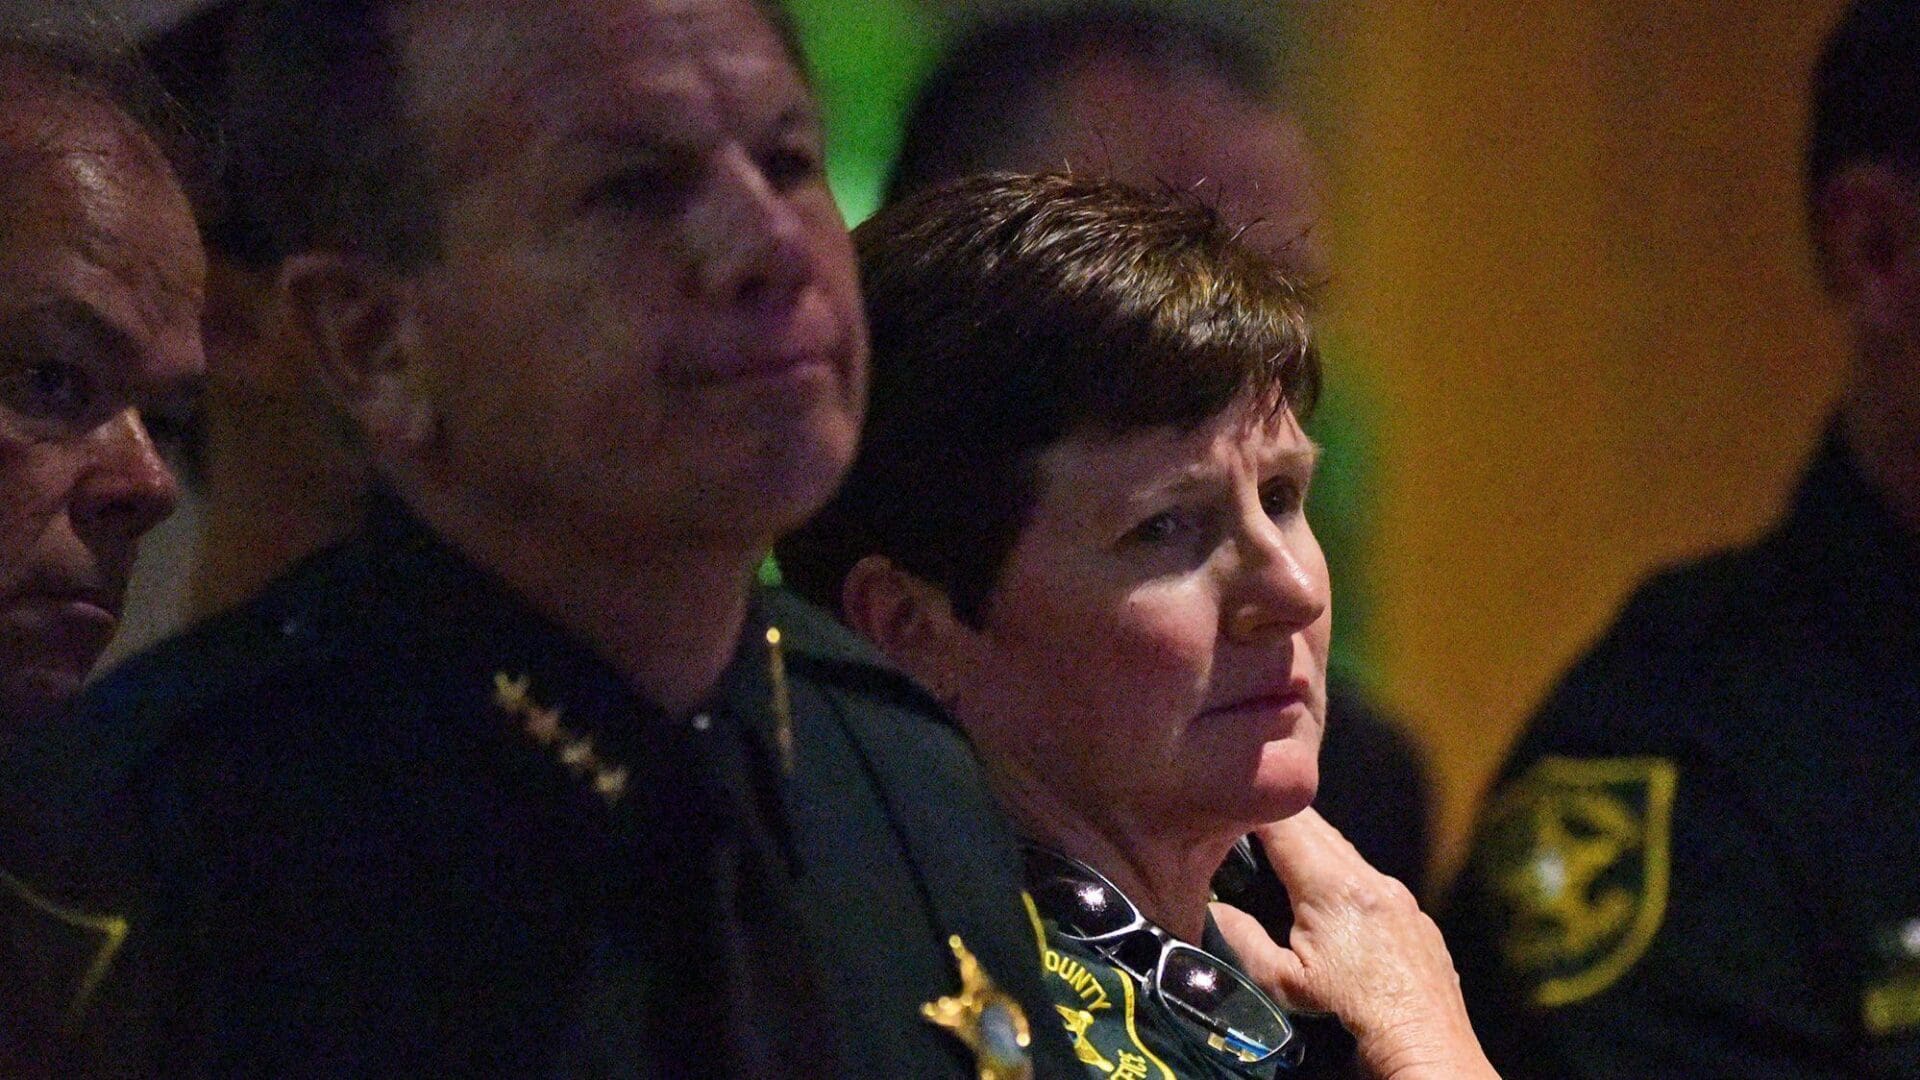 Broward County Sheriff Captain Jan Jordan Removed Fired Replaced Bungled Parkland